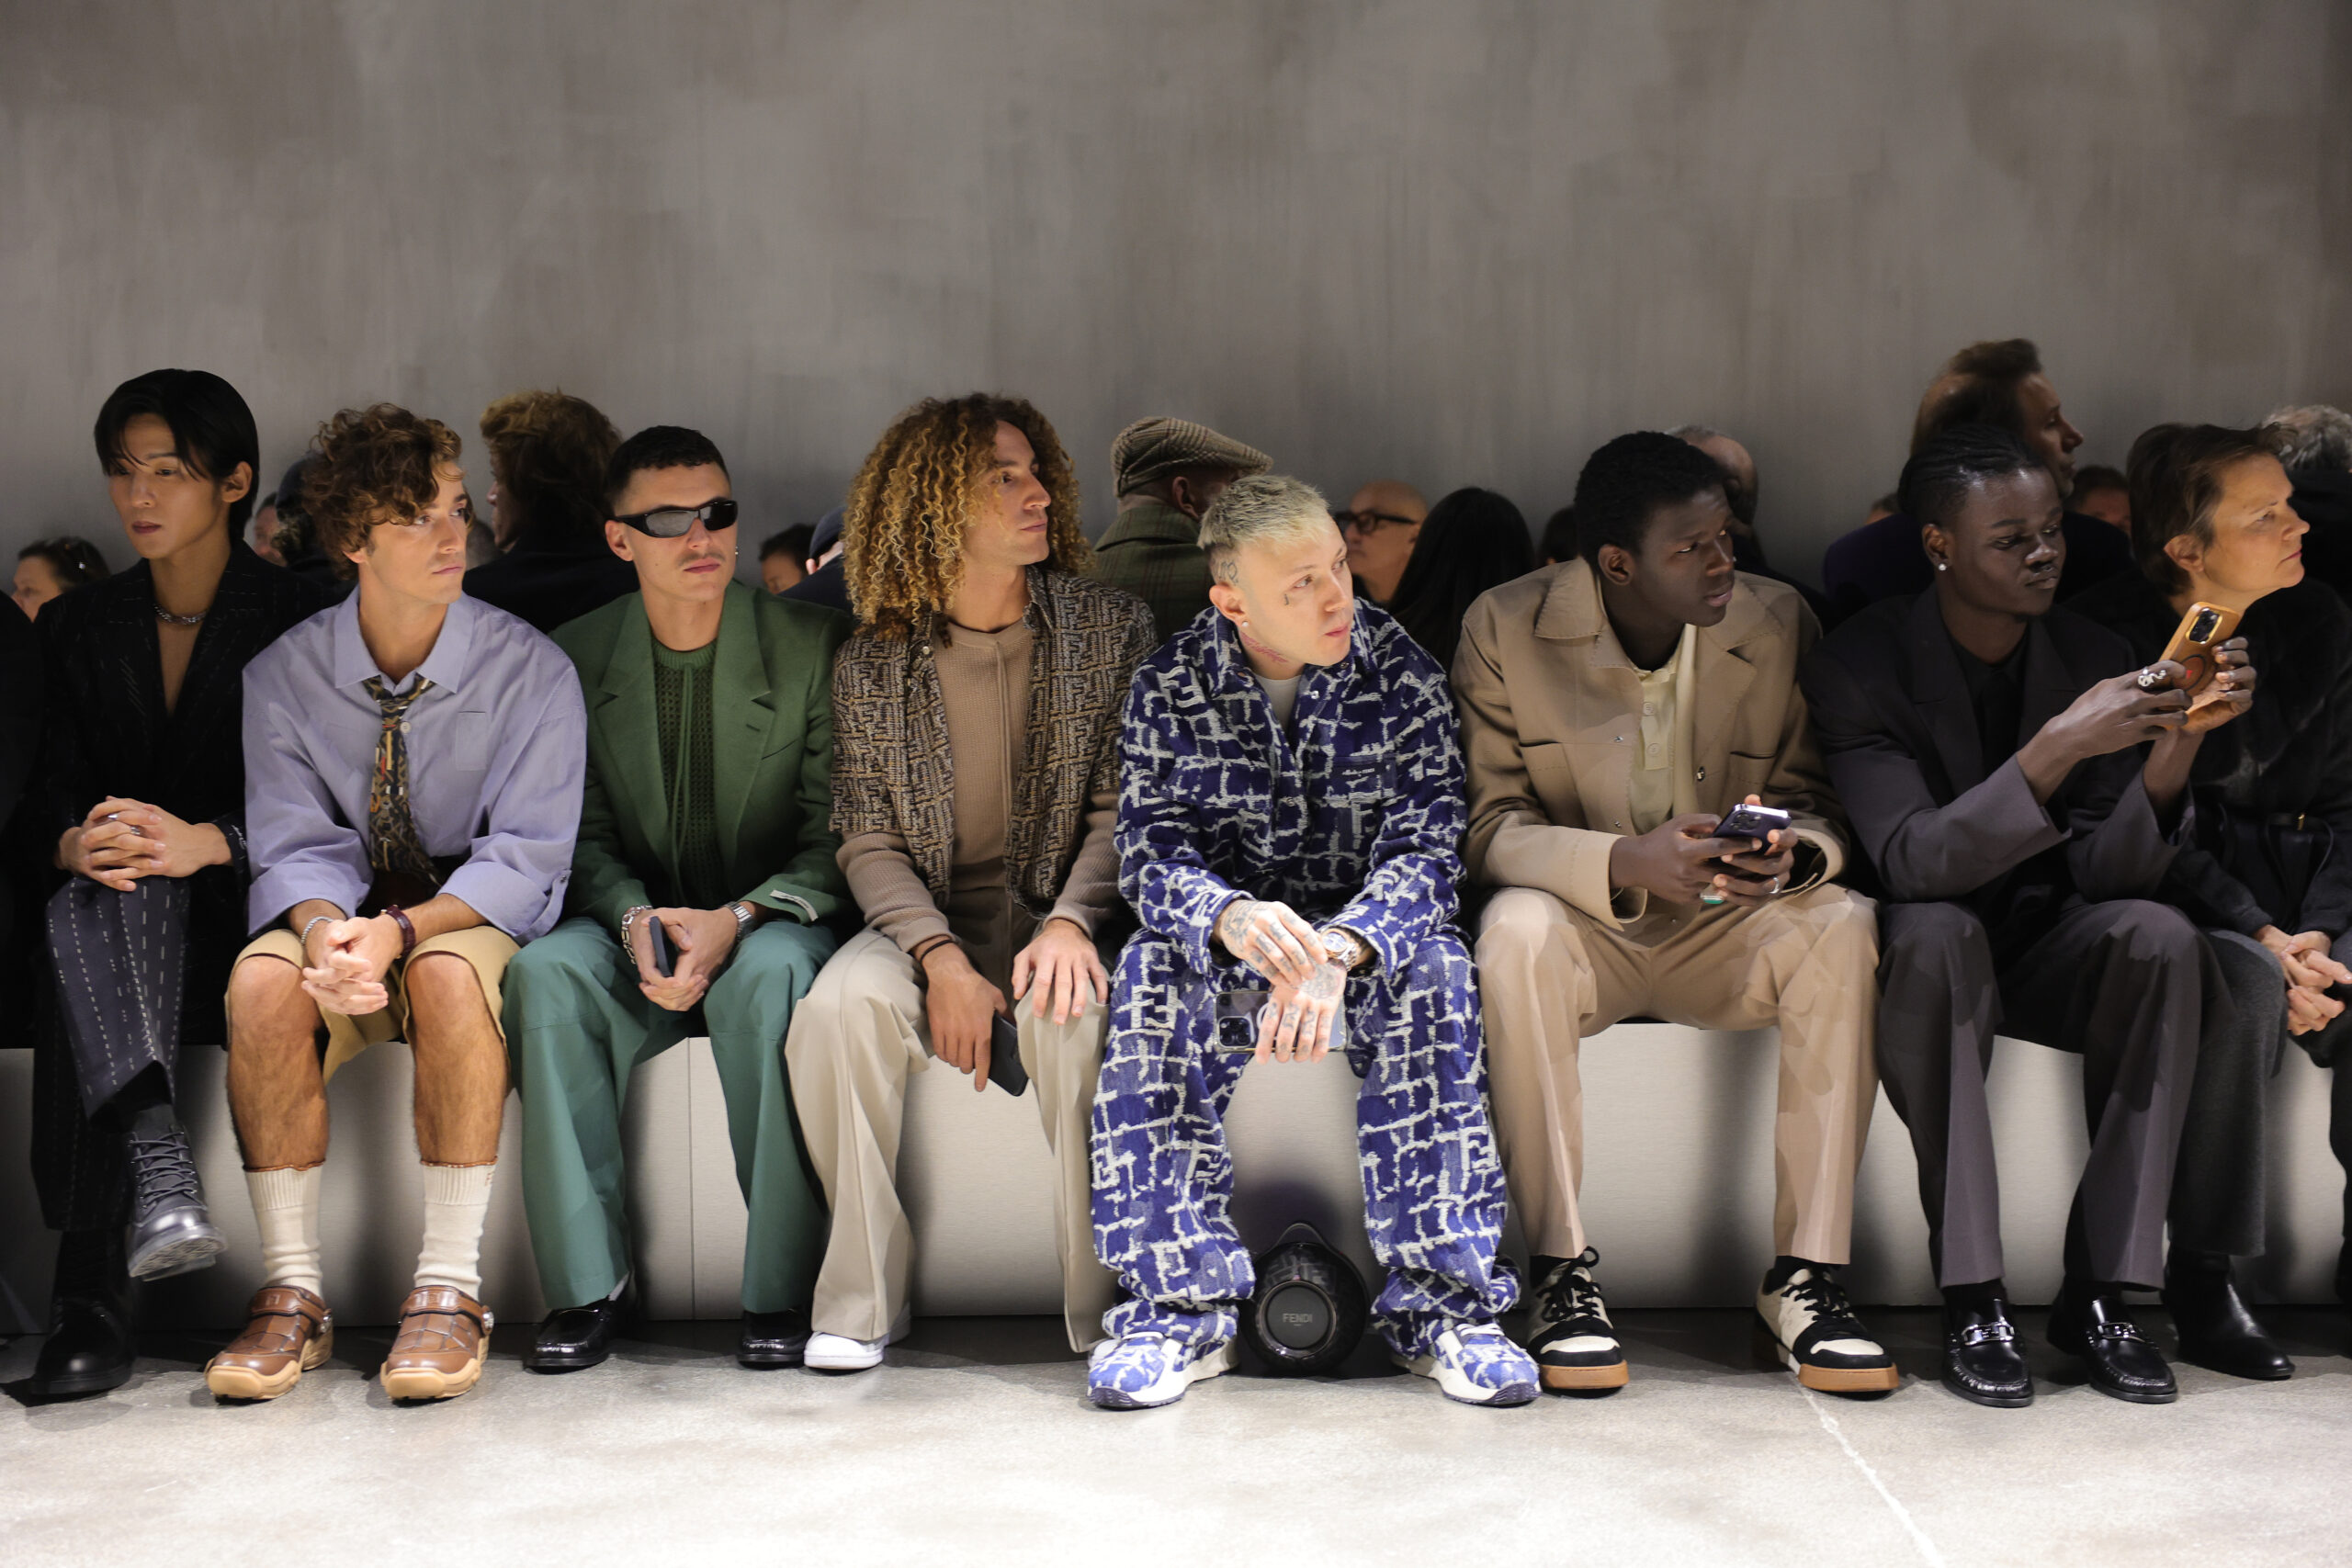 Ren Meguro, Guitarricadelafuente, Arón Piper, Lazza, Seydou Sarr, and Moustapha Fall seated front row at the FENDI Fall/Winter 2024/2025 show, showcasing an eclectic mix of personal styles against the minimalist backdrop of the runway.